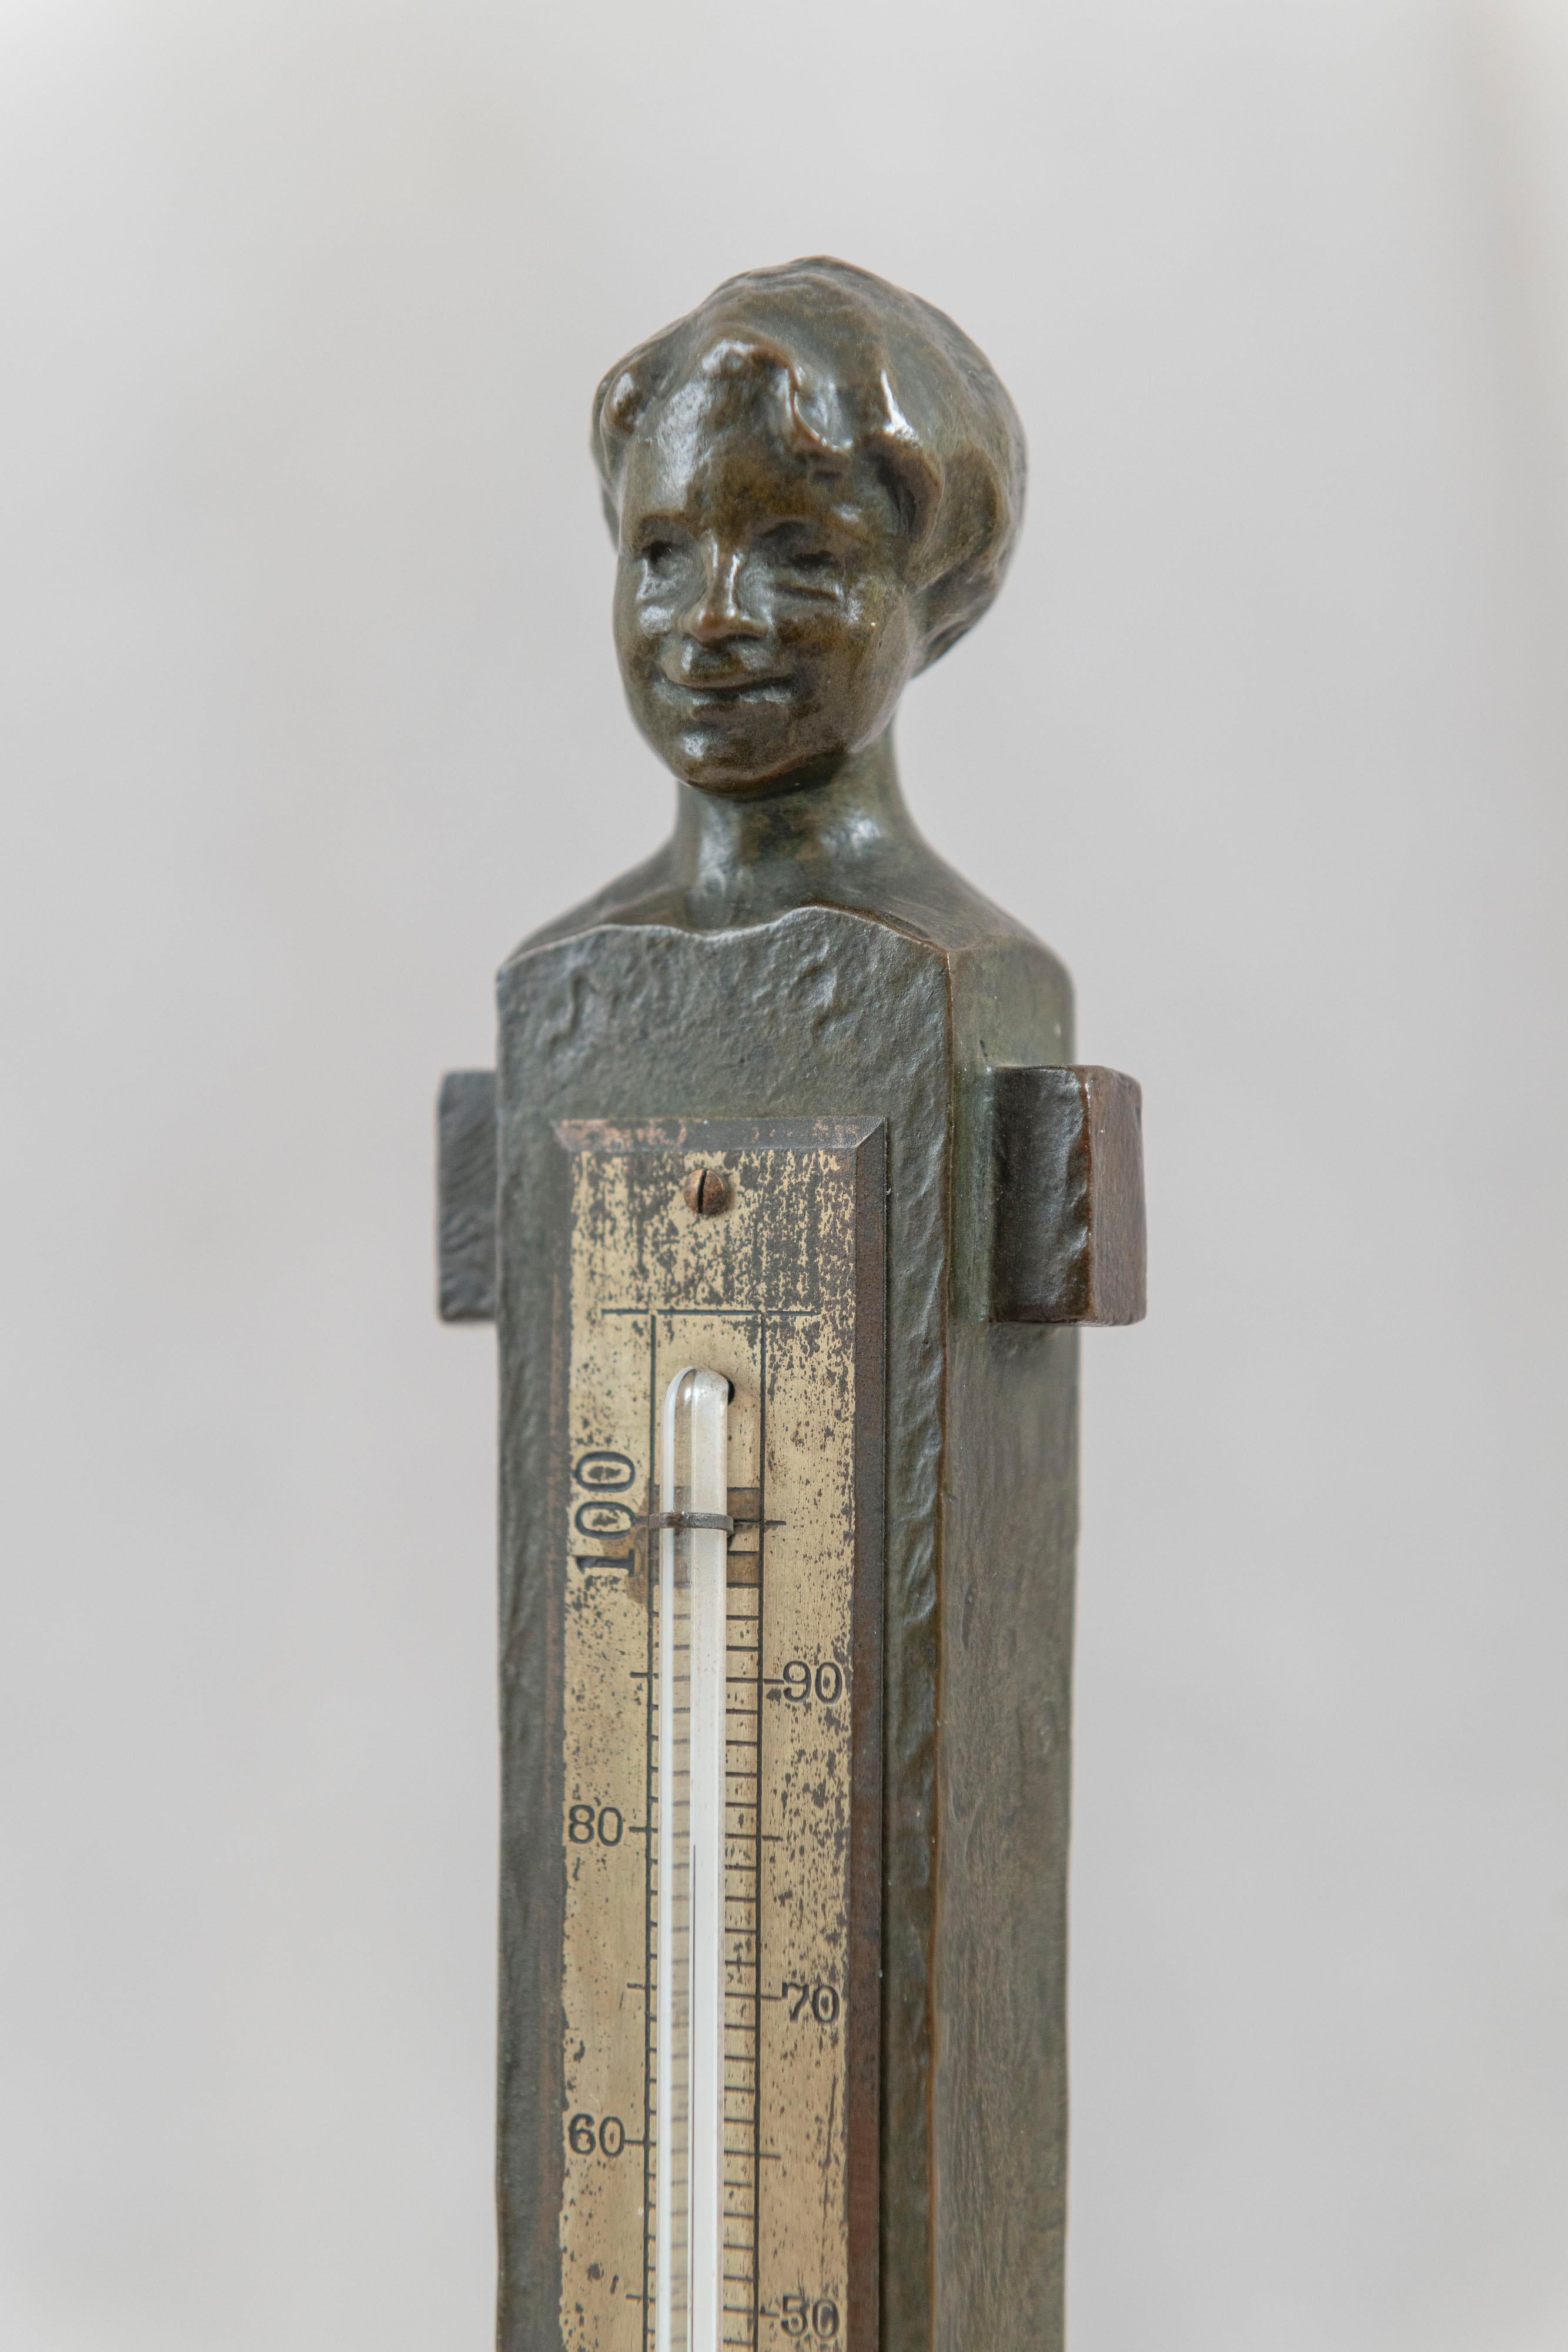 It wasn't easy trying to title this bronze in one sentence. The first thing about it to my eye is the wonderful whimsy displayed. The fact that it's a thermometer just adds to the joy of it. Showing the young girl's feet at the bottom of the